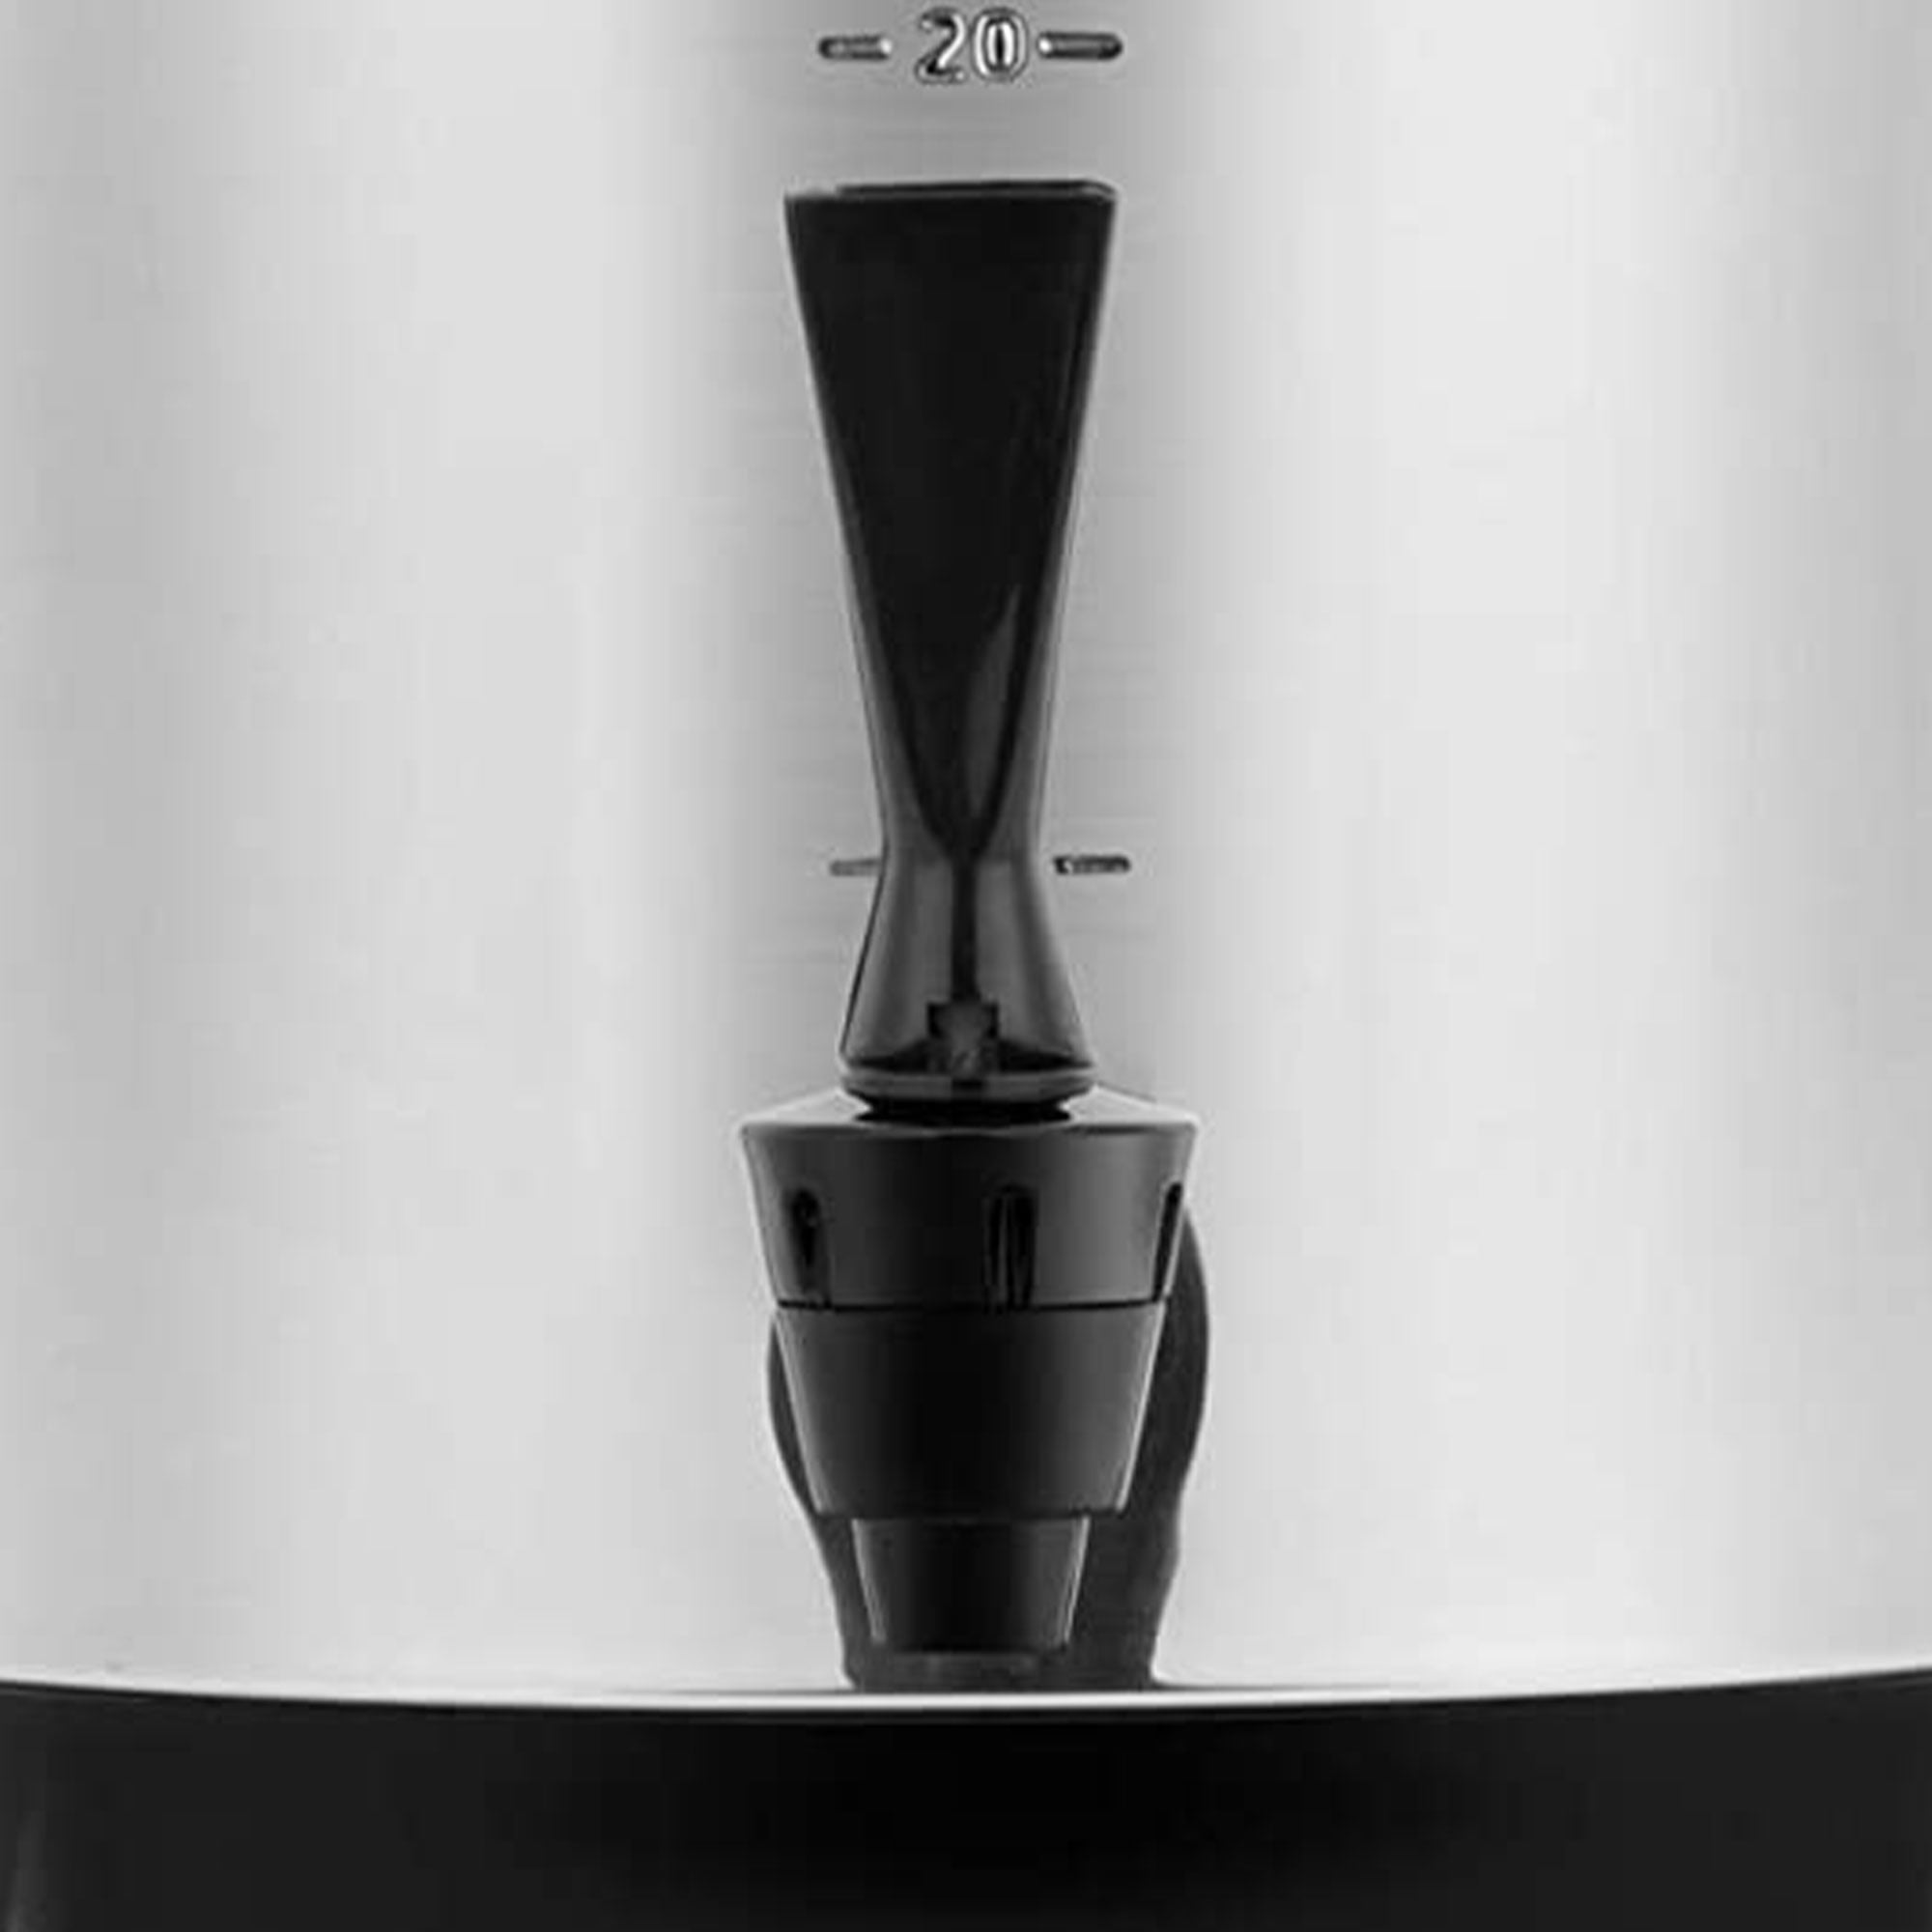 Coffee Pro CP50 Urn/Coffeemaker, 50-Cups, 12-Inch x16-1/2-Inch x22-Inch ,  Stainless Steel